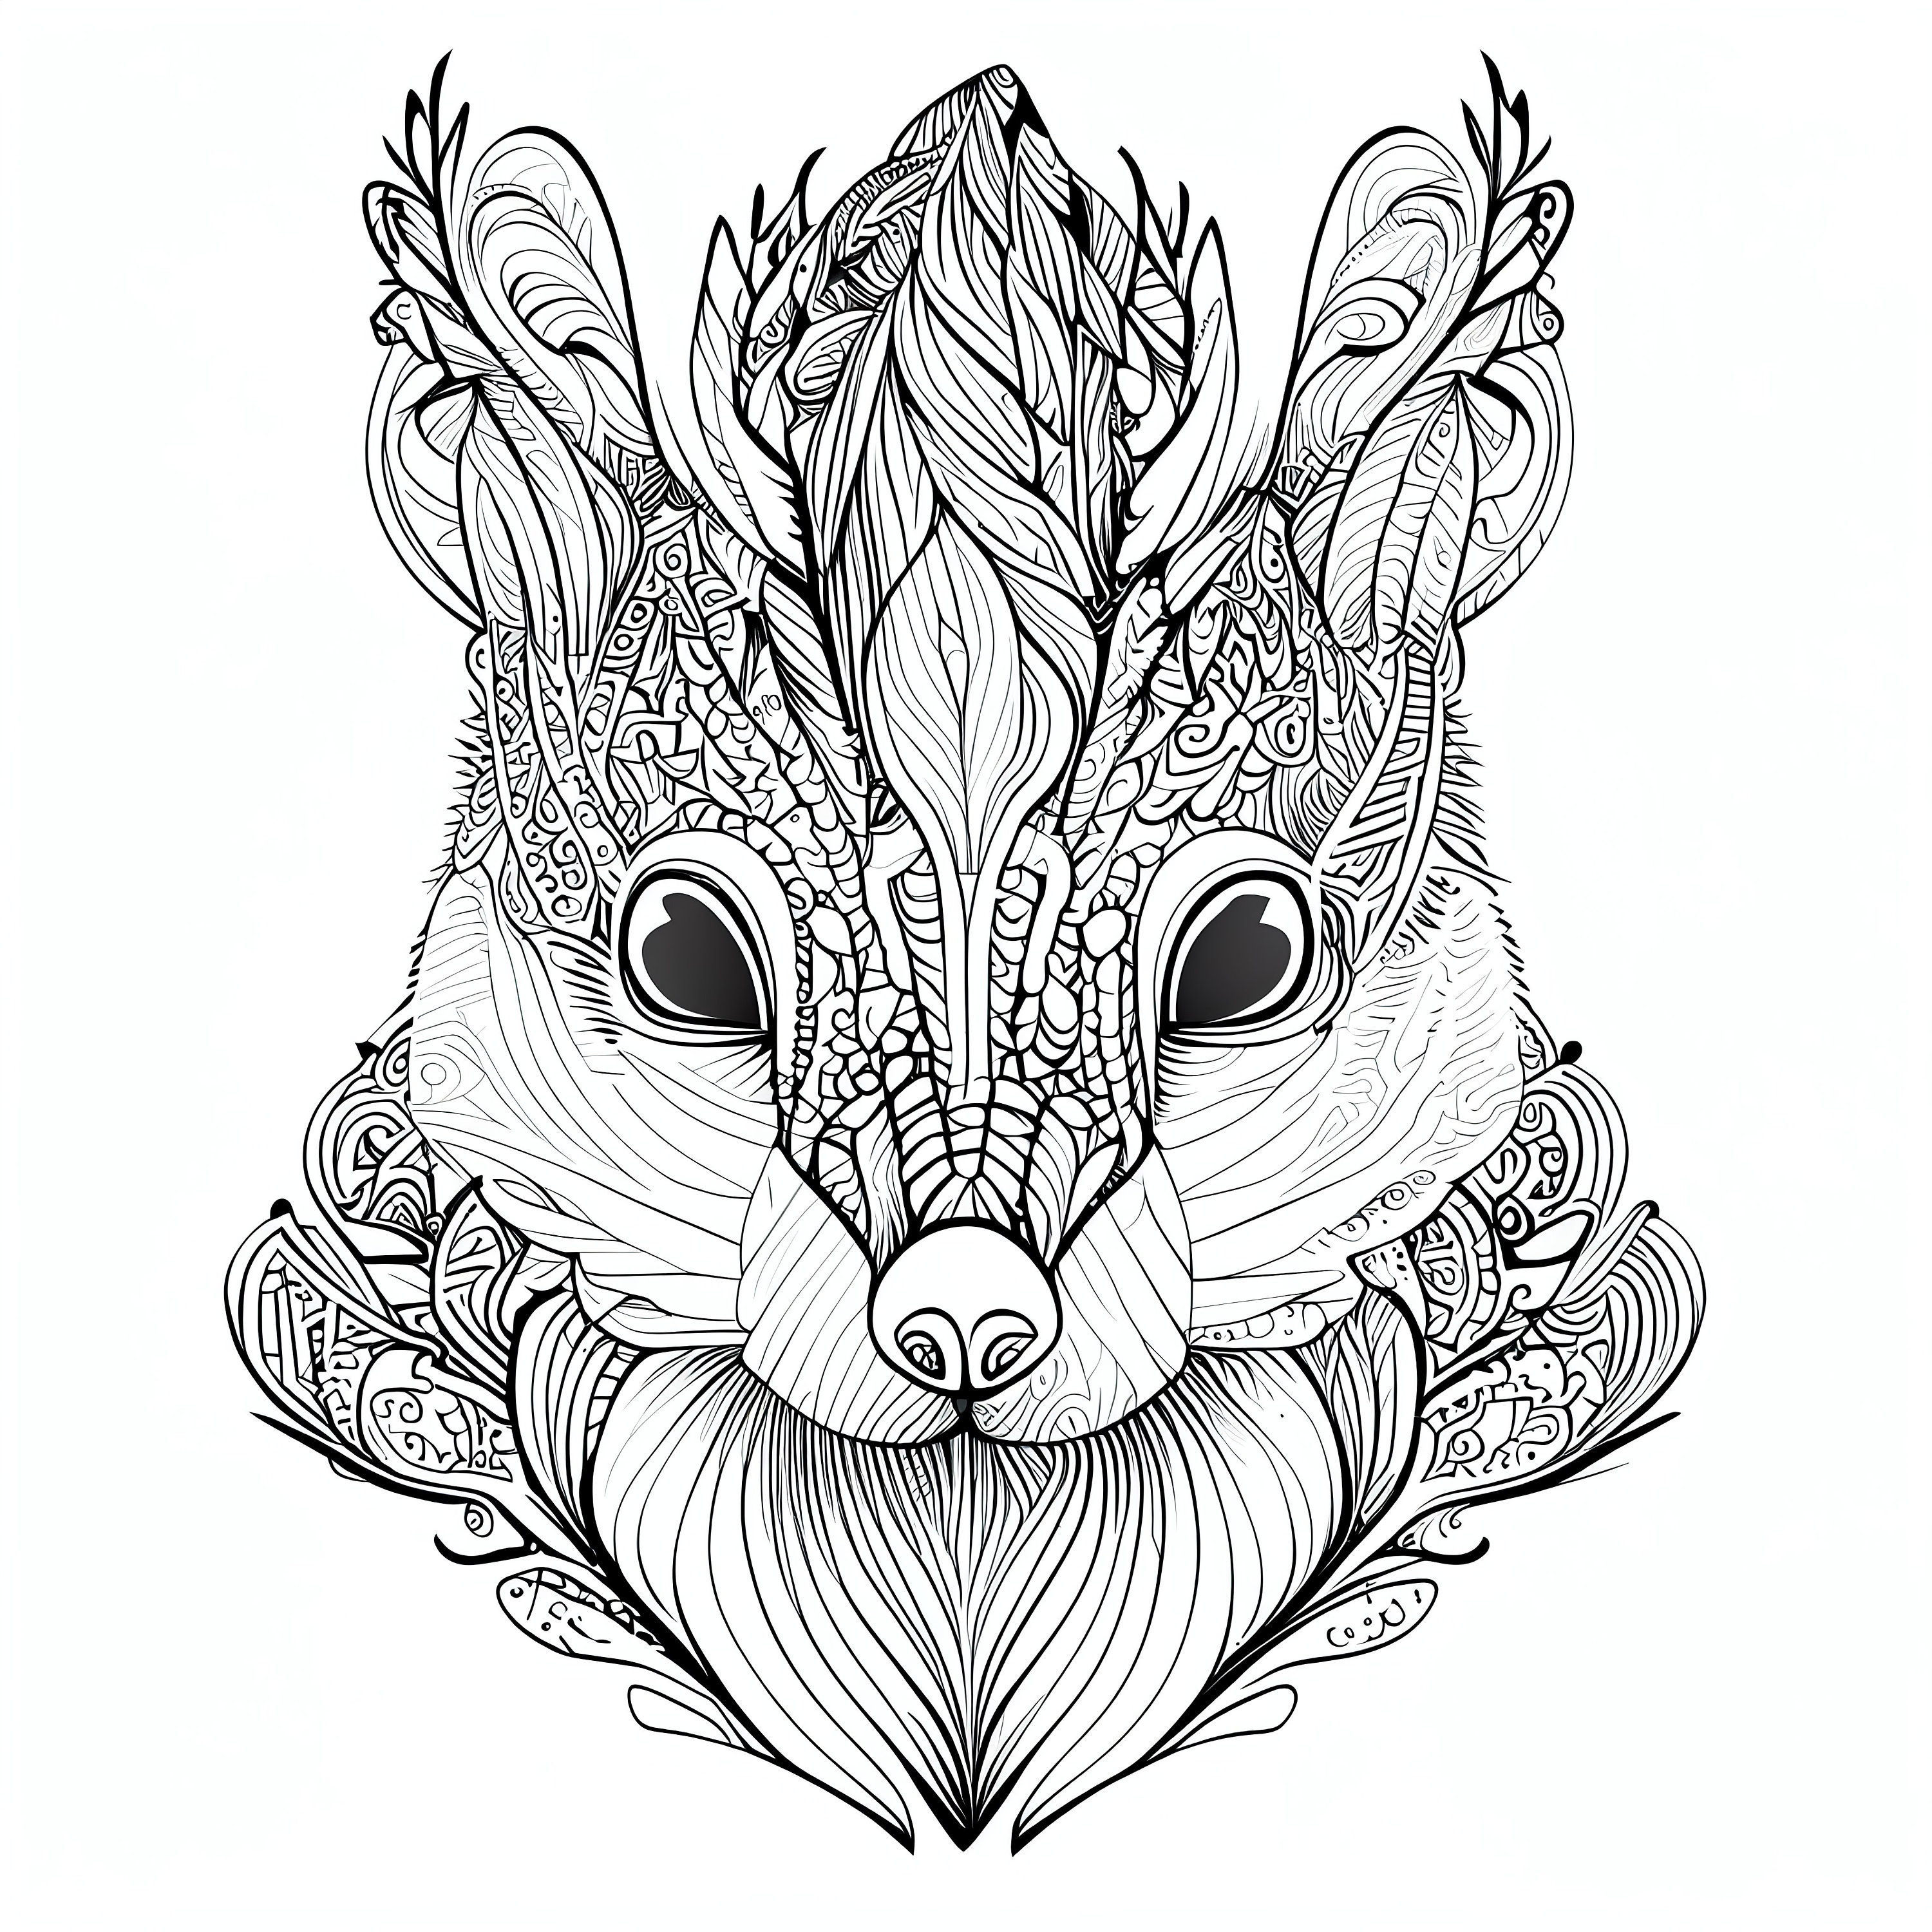 Squirrel Coloring Book For Adults: Stress relief Coloring Book For Grown  ups, Containing 30 Hand Drawn Paisley, Henna and Zentangle Squirrel Coloring  (Paperback)